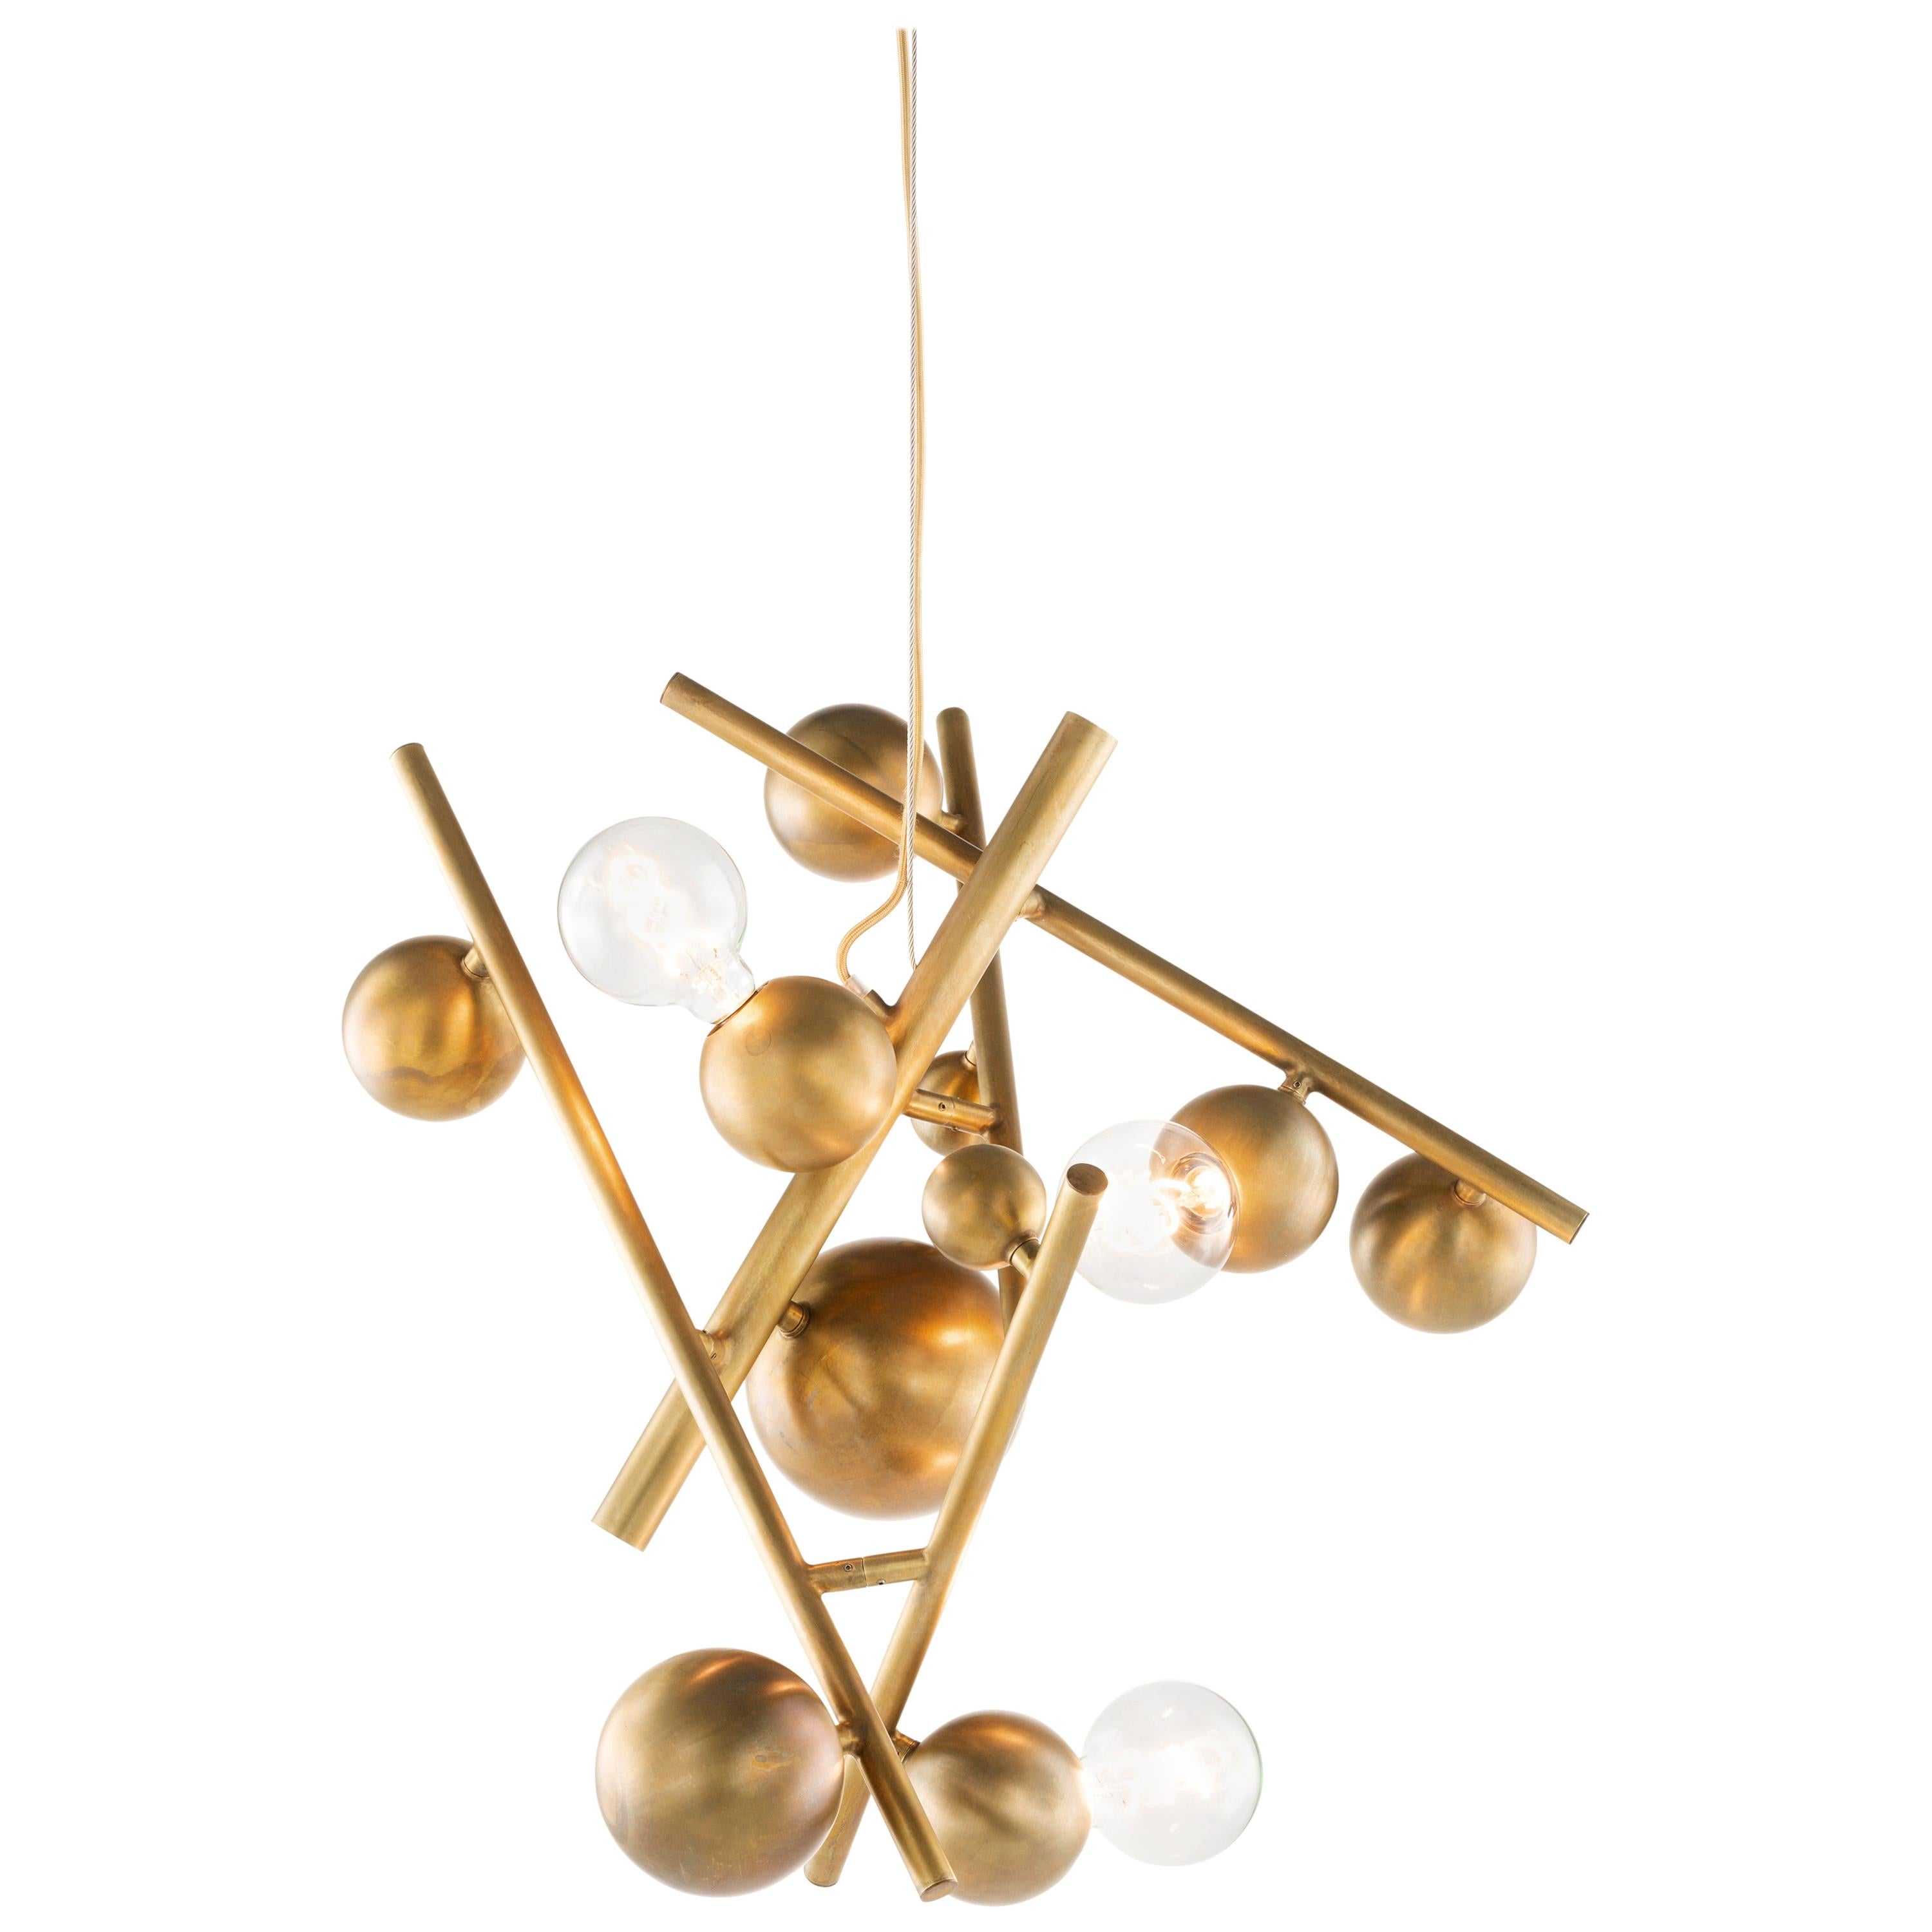 Modern Chandelier in a Brass Burnished Finish, Galaxy Collection, by Brand Van For Sale